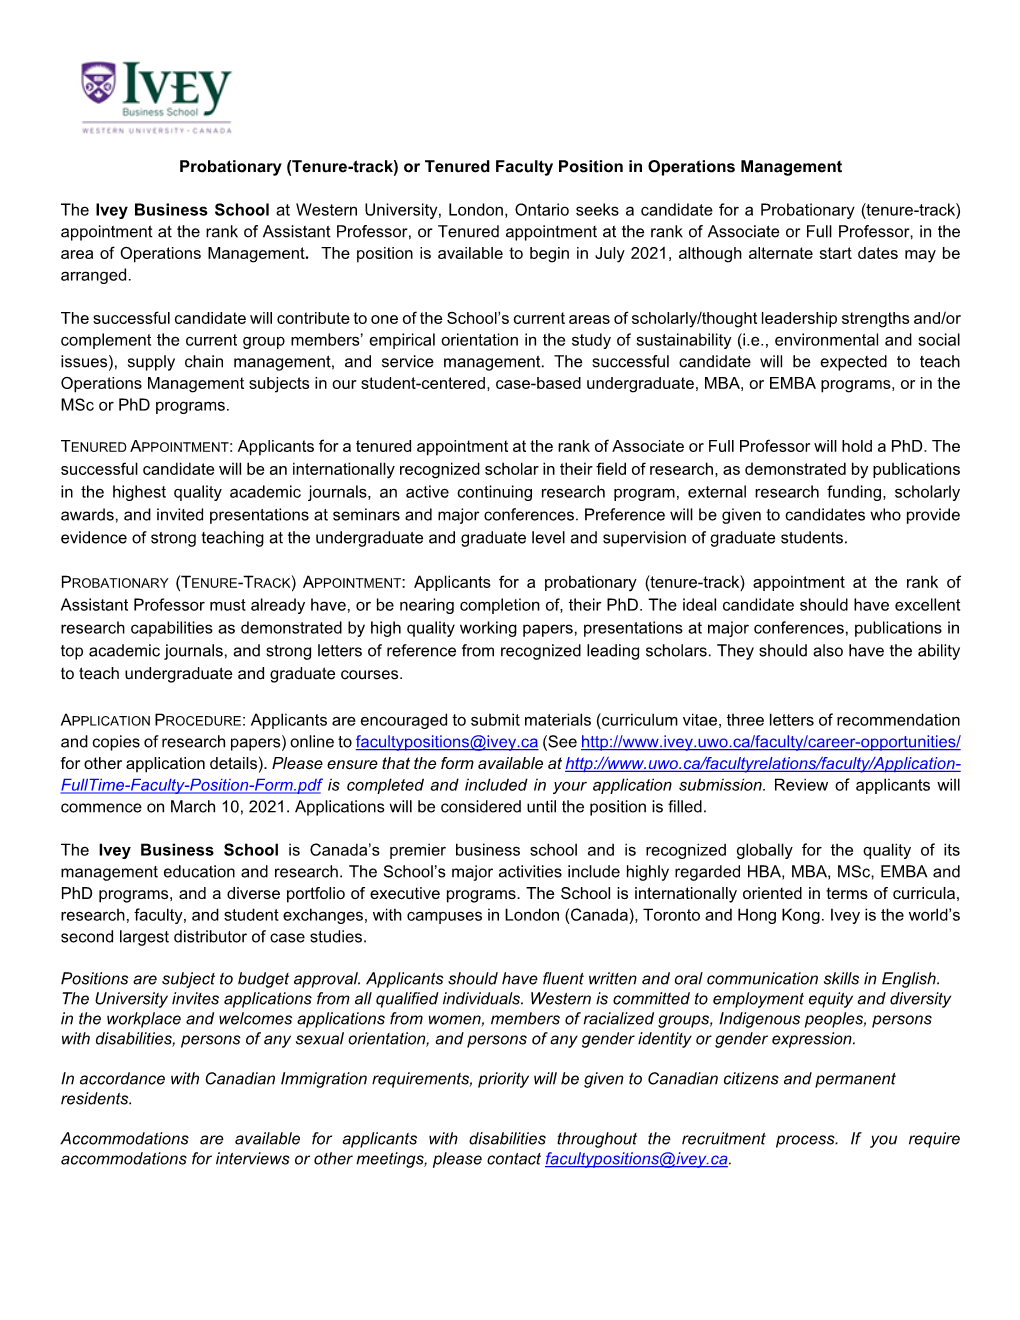 (Tenure-Track) Or Tenured Faculty Position in Operations Management